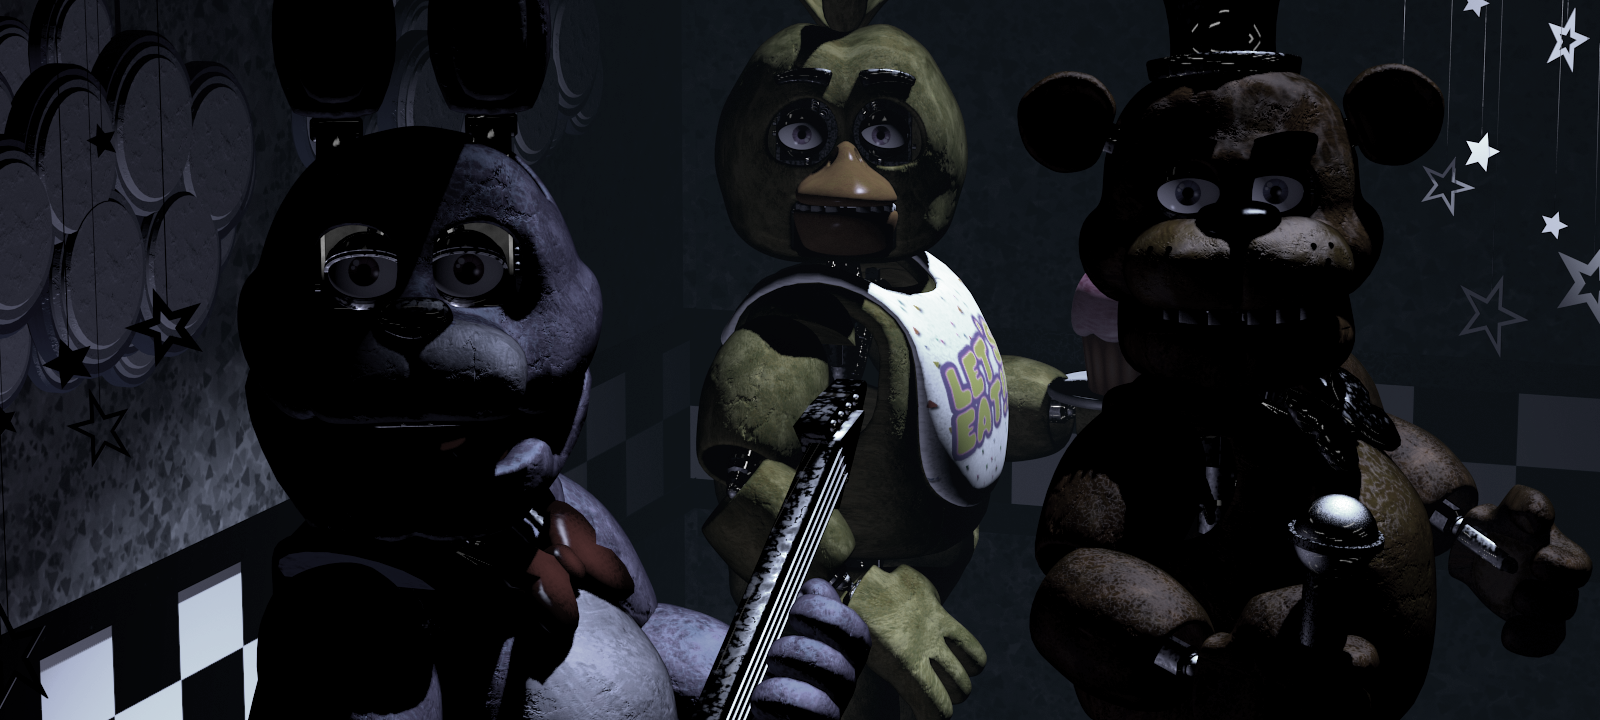 Scott Cawthon Releasing “Five Nights at Freddy’s” Novel - They're Letting the Bear Write Books Now?!